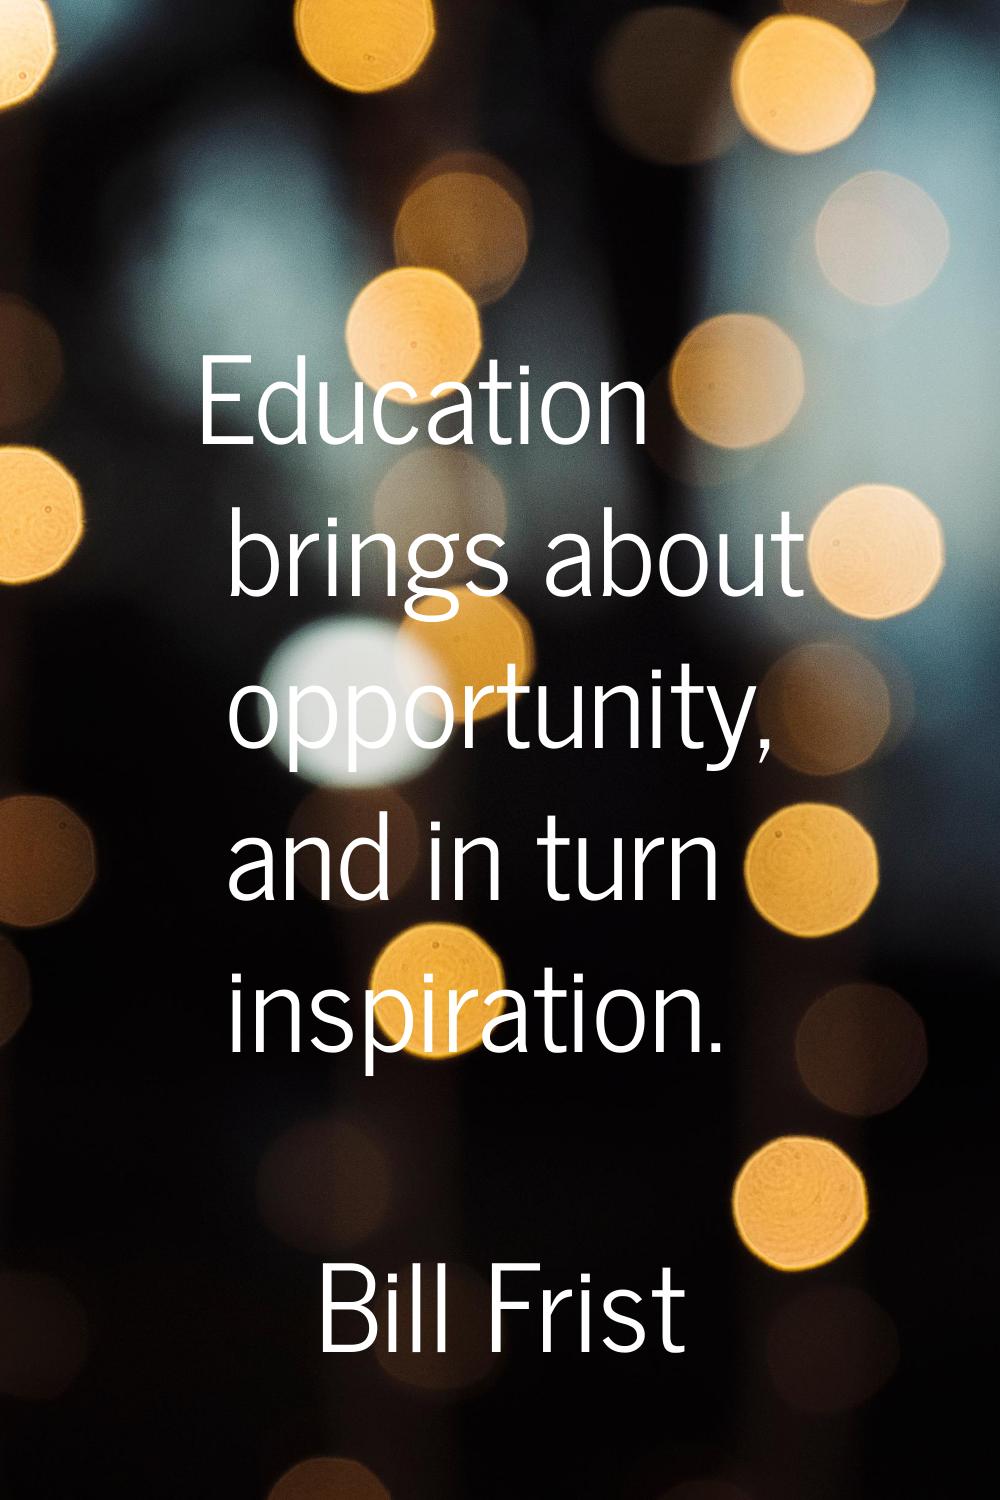 Education brings about opportunity, and in turn inspiration.